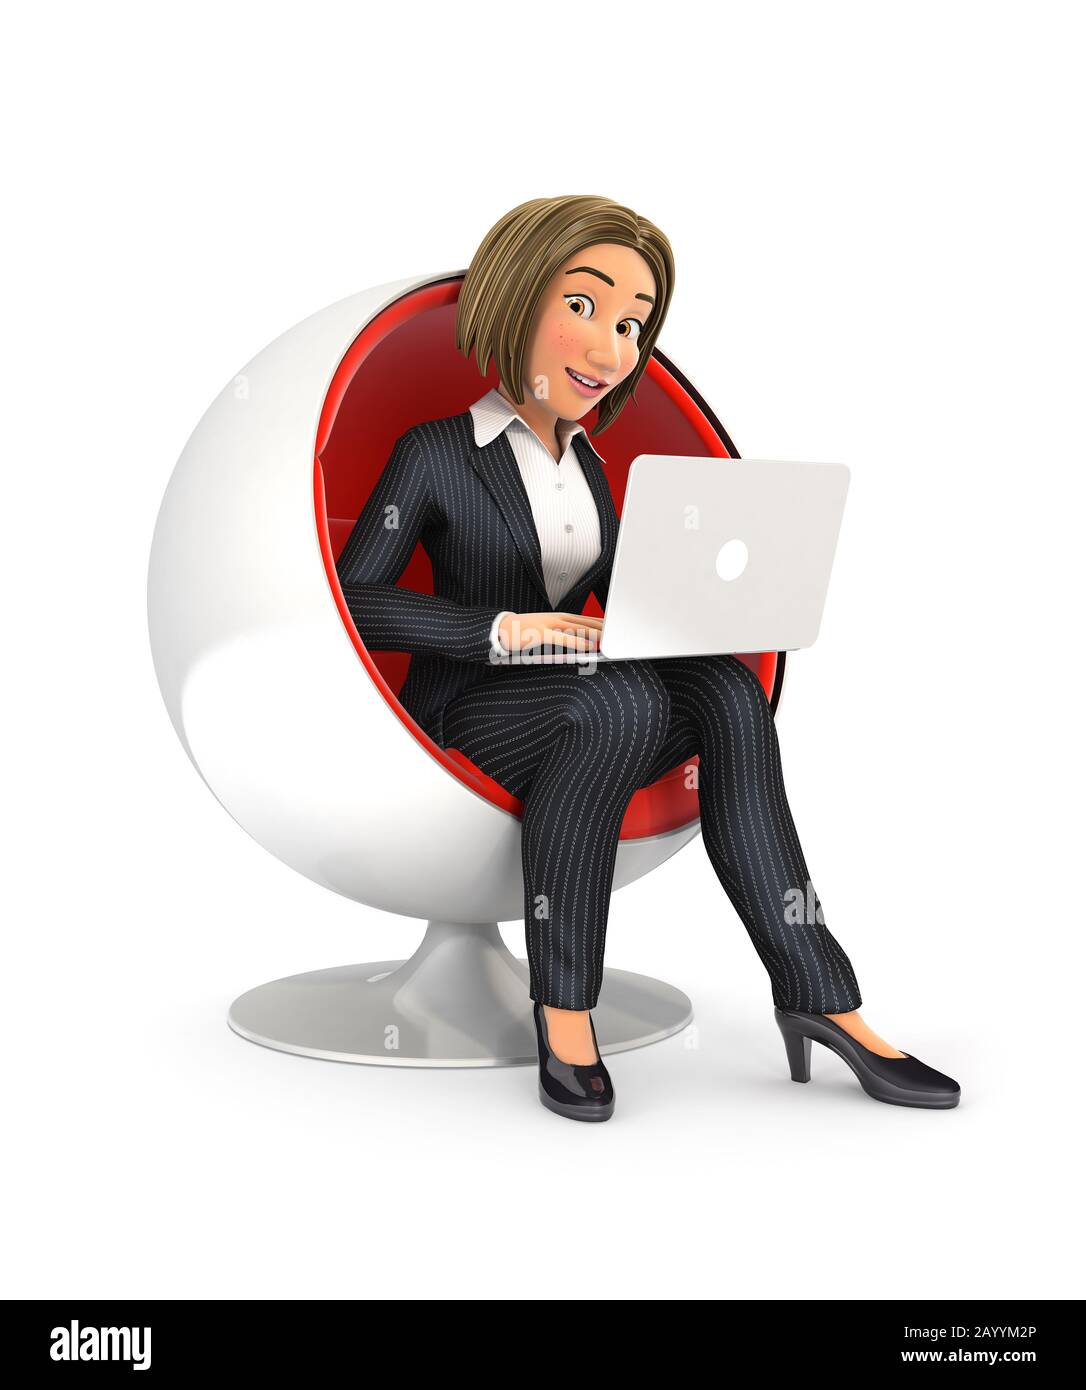 3d business woman sitting in round chair and using laptop, illustration with isolated white background Stock Photo